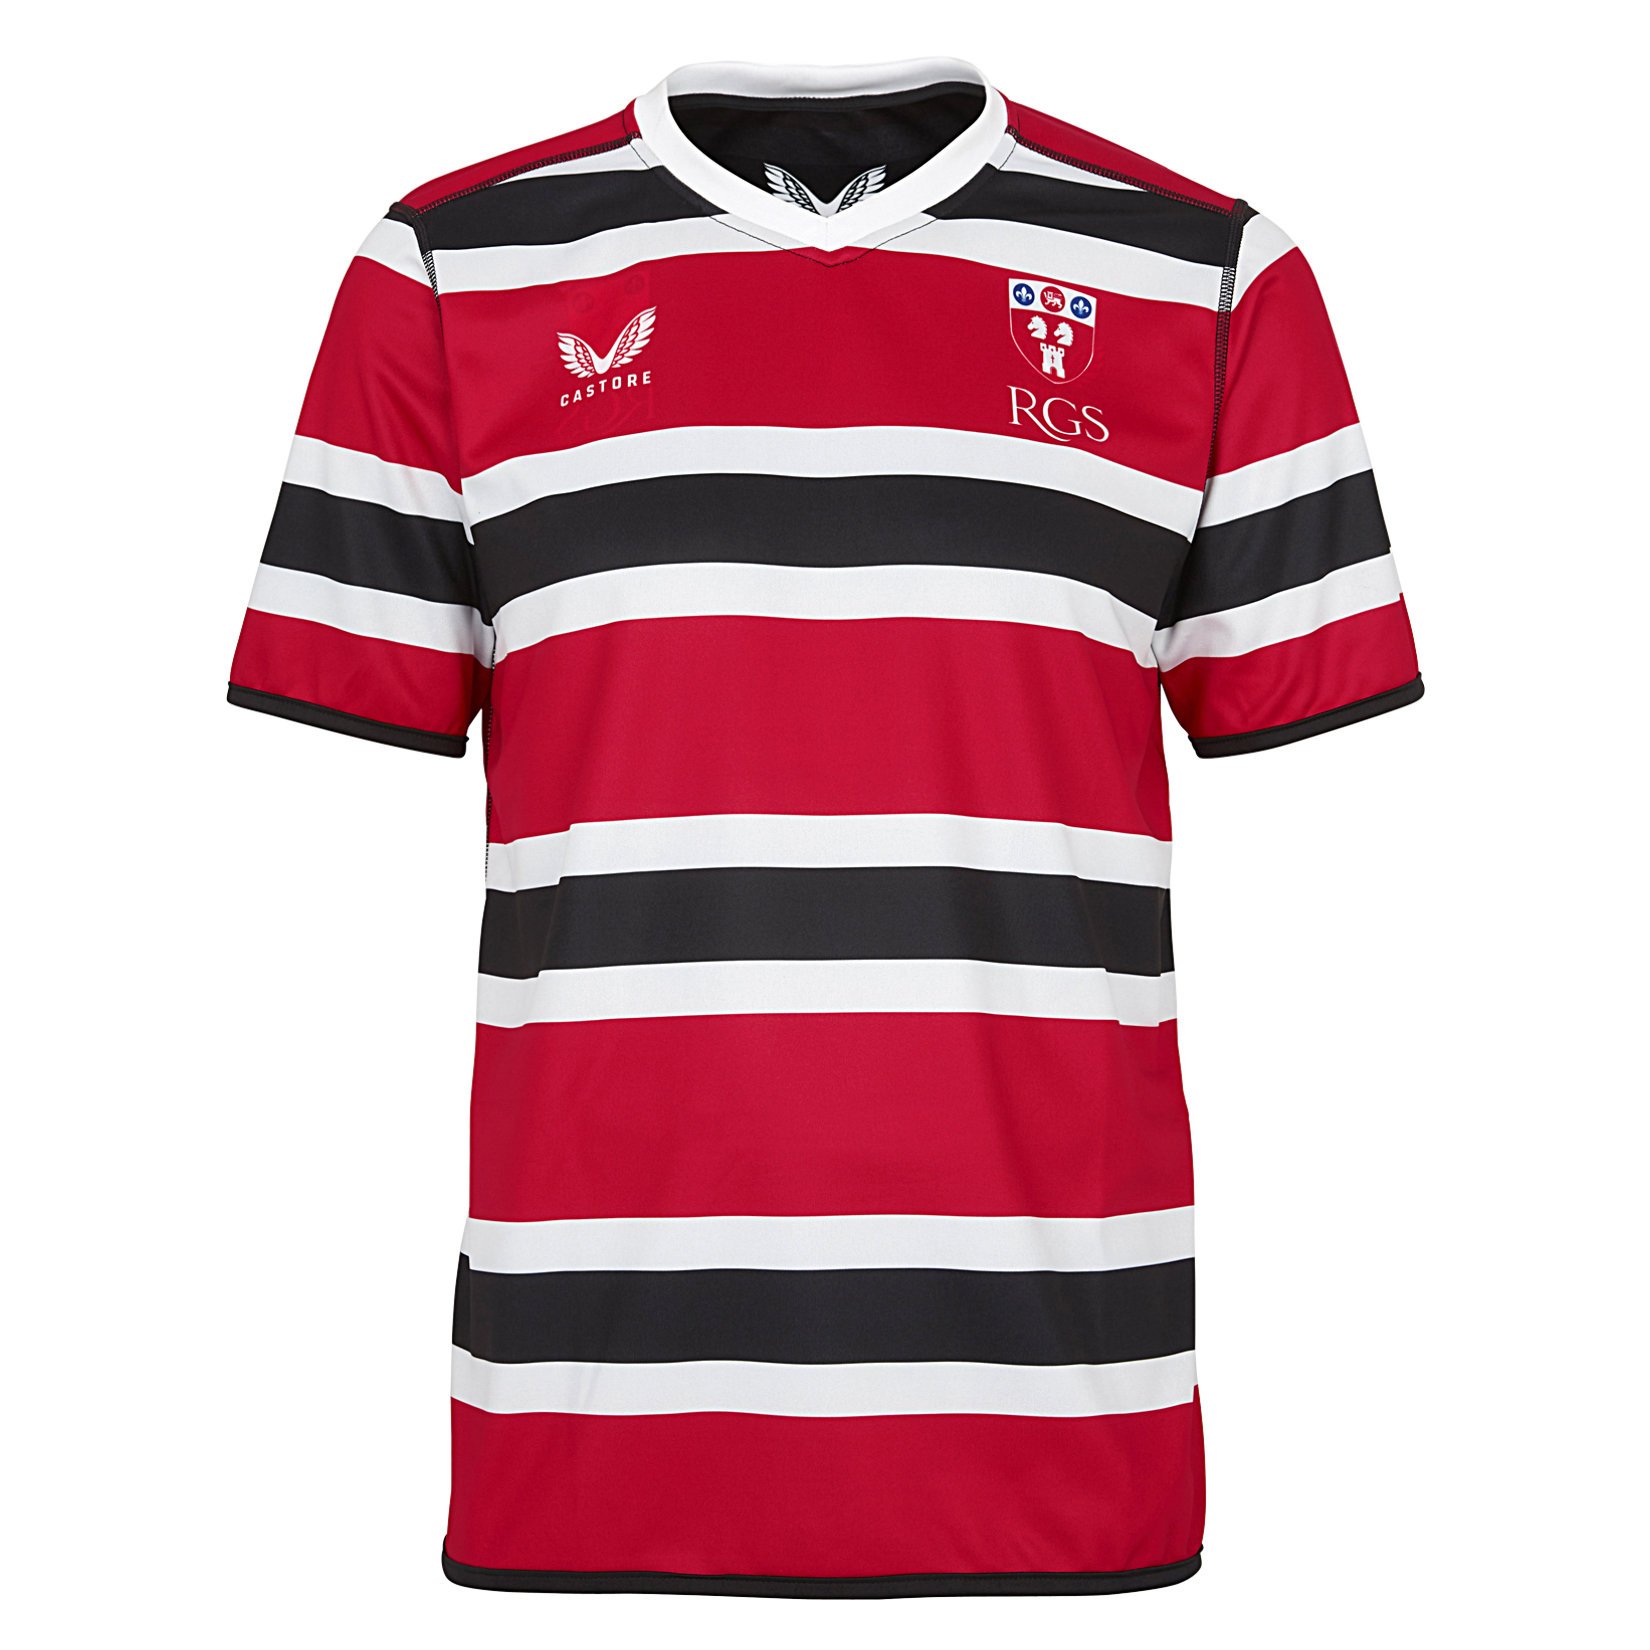 RGS Castore Reversable Rugby Jersey - SS